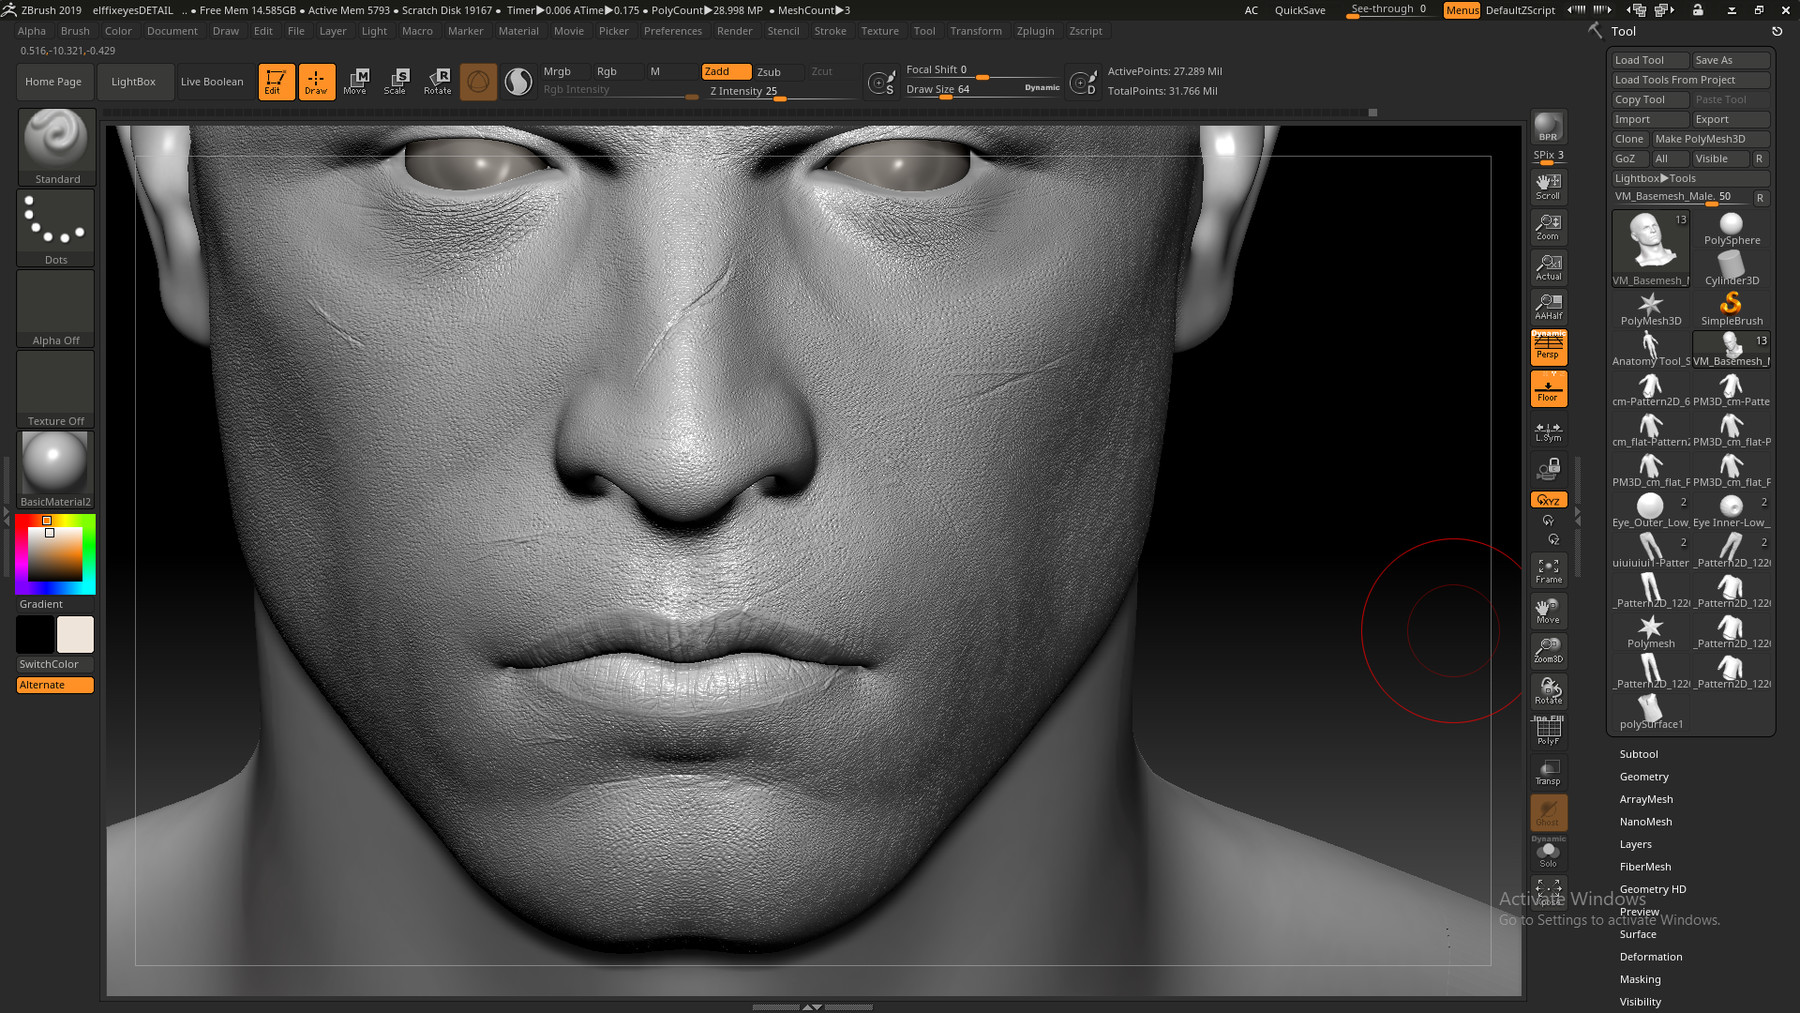 pores with zbrush